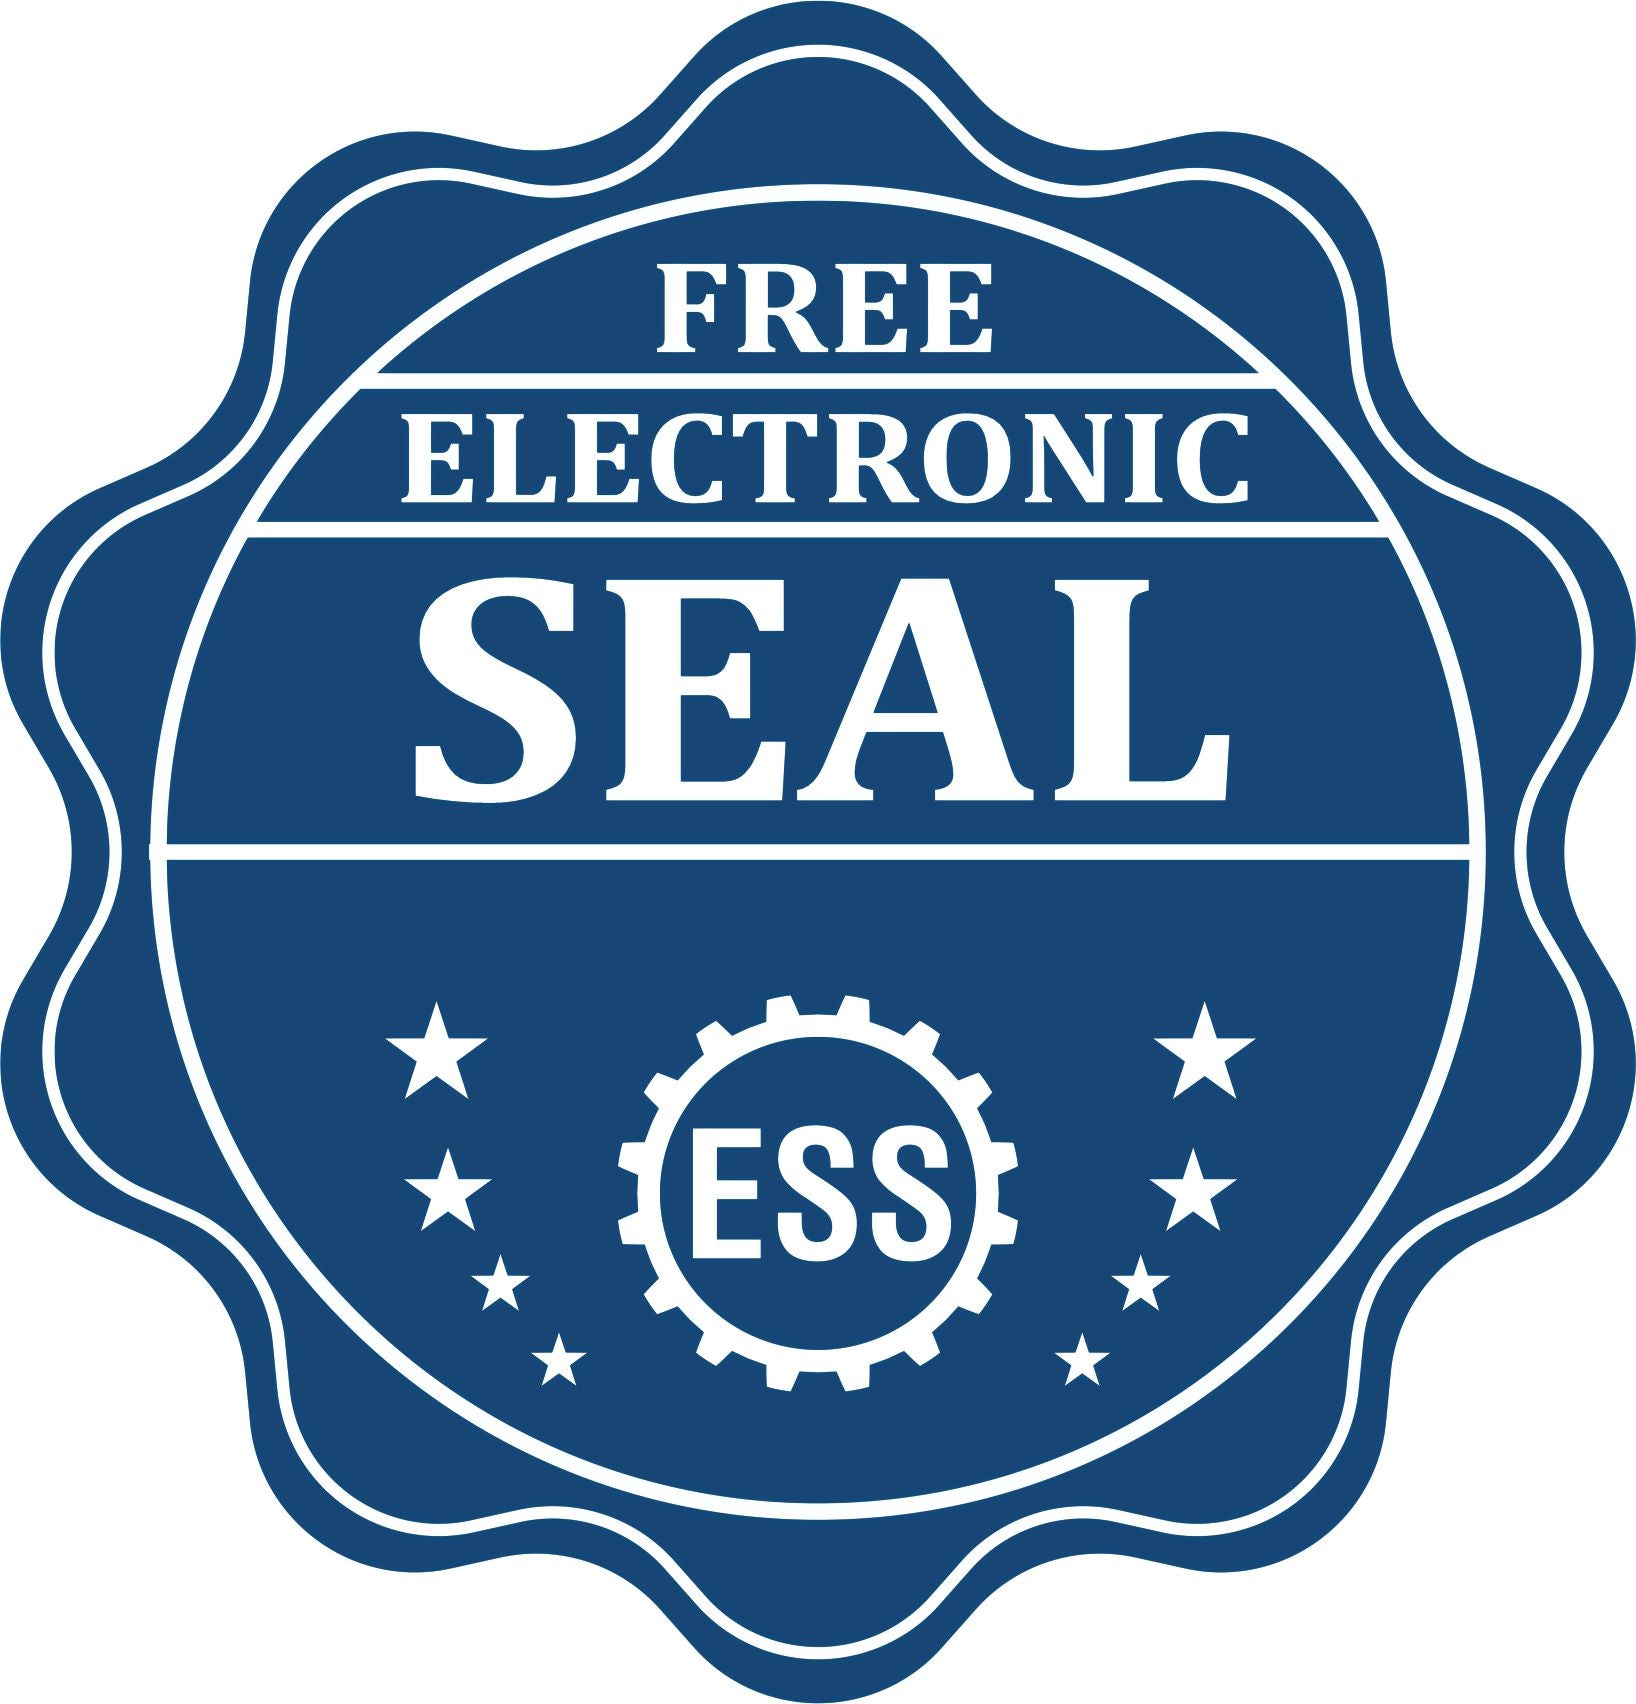 A badge showing a free electronic seal for the Handheld New York Land Surveyor Seal with stars and the ESS gear on the emblem.